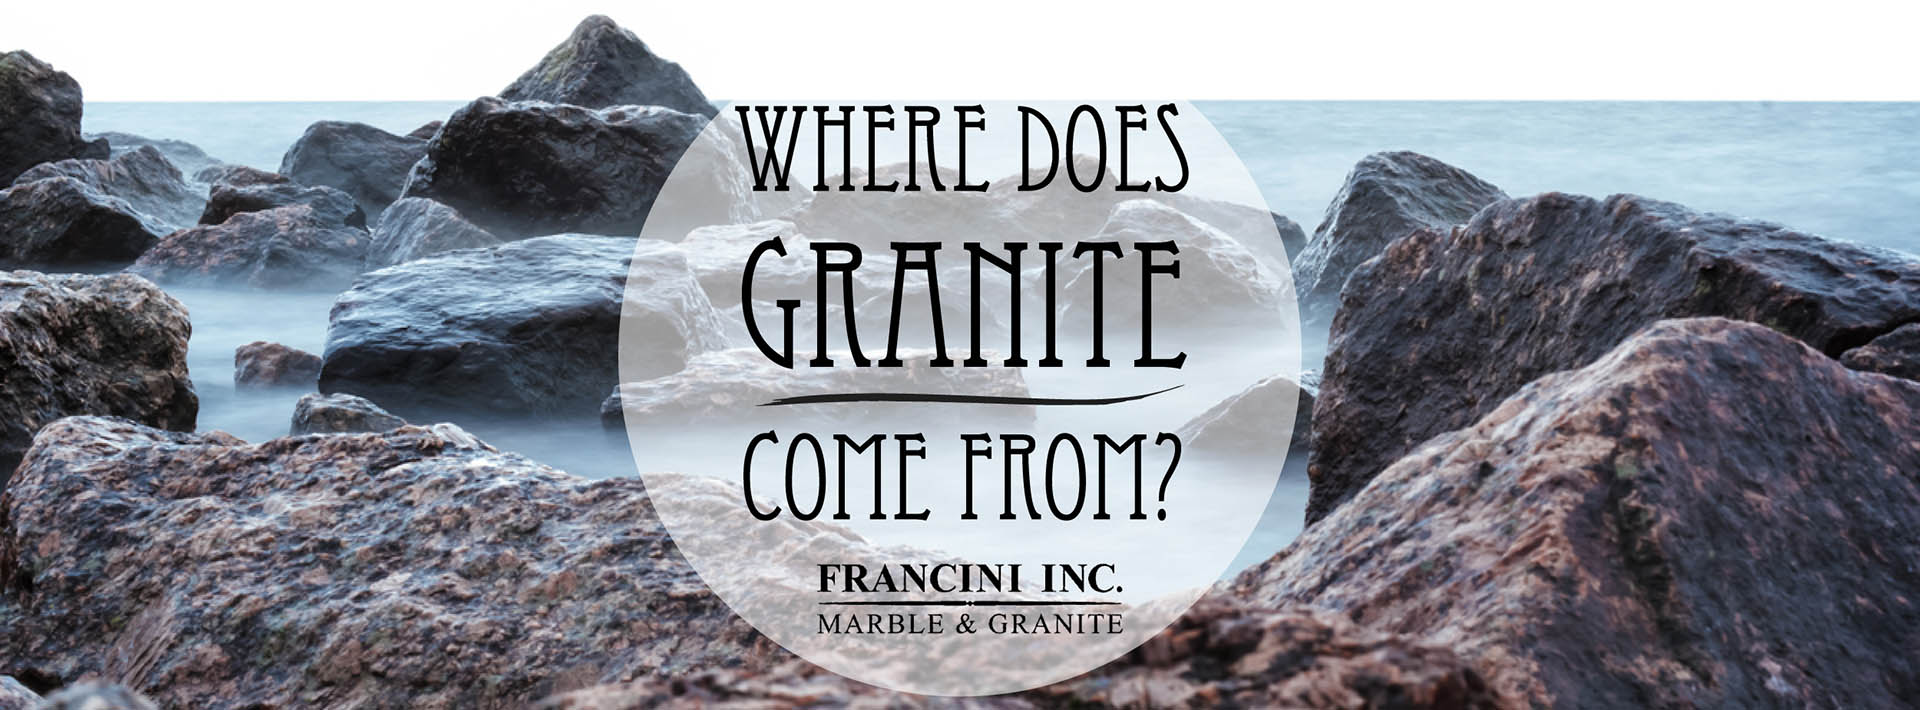 Where Does Granite Come From?